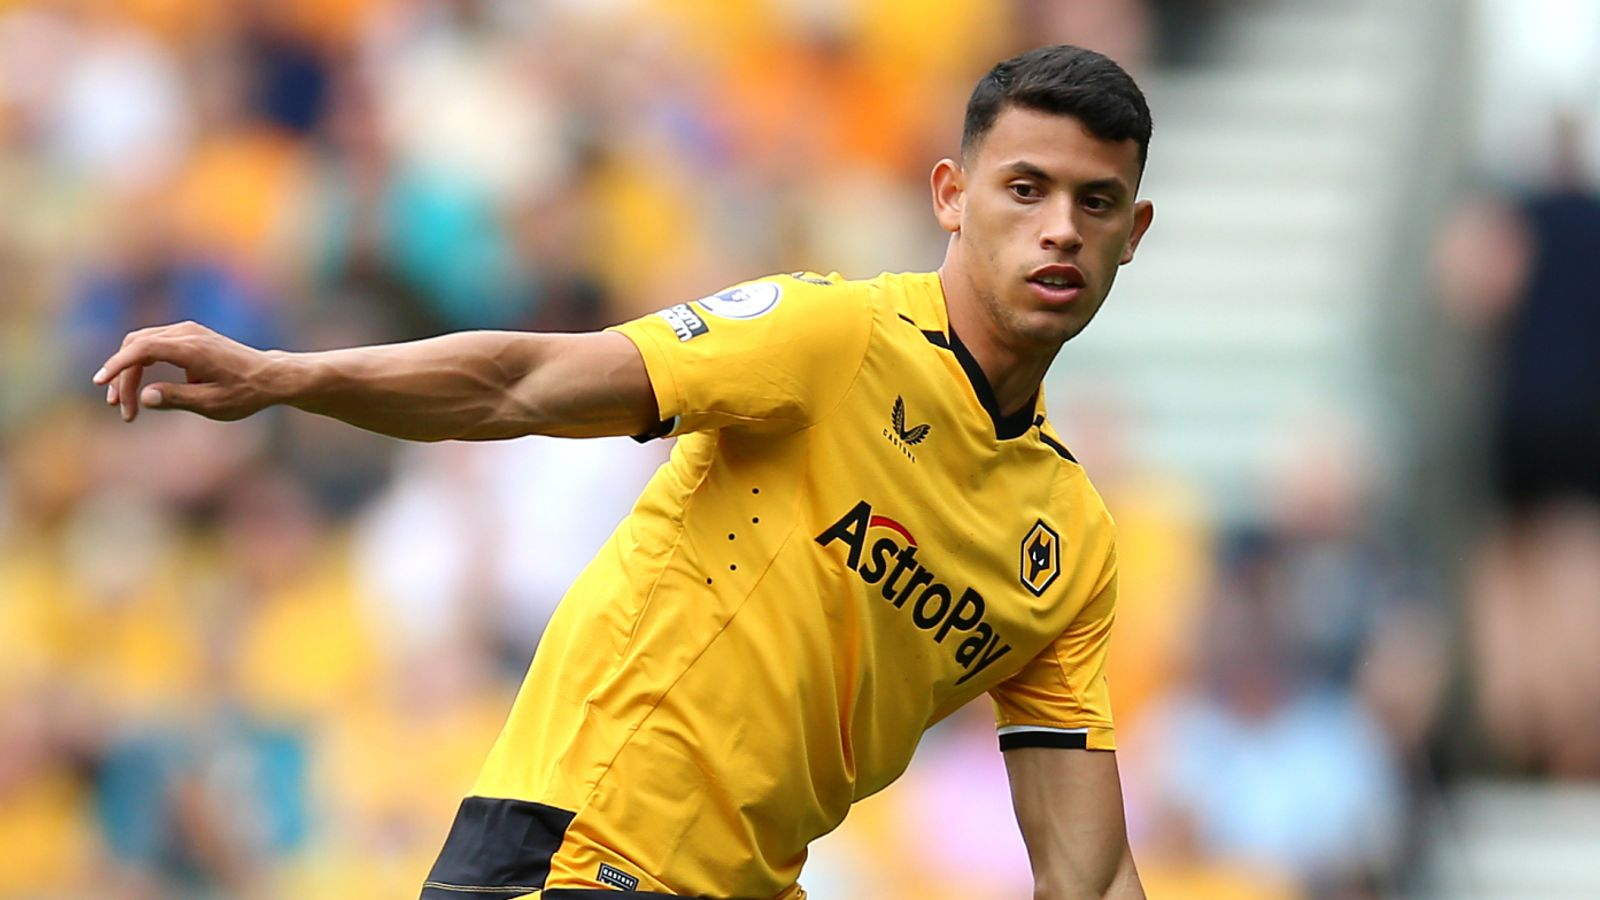 Wolves Player Nunes Moves To Man City